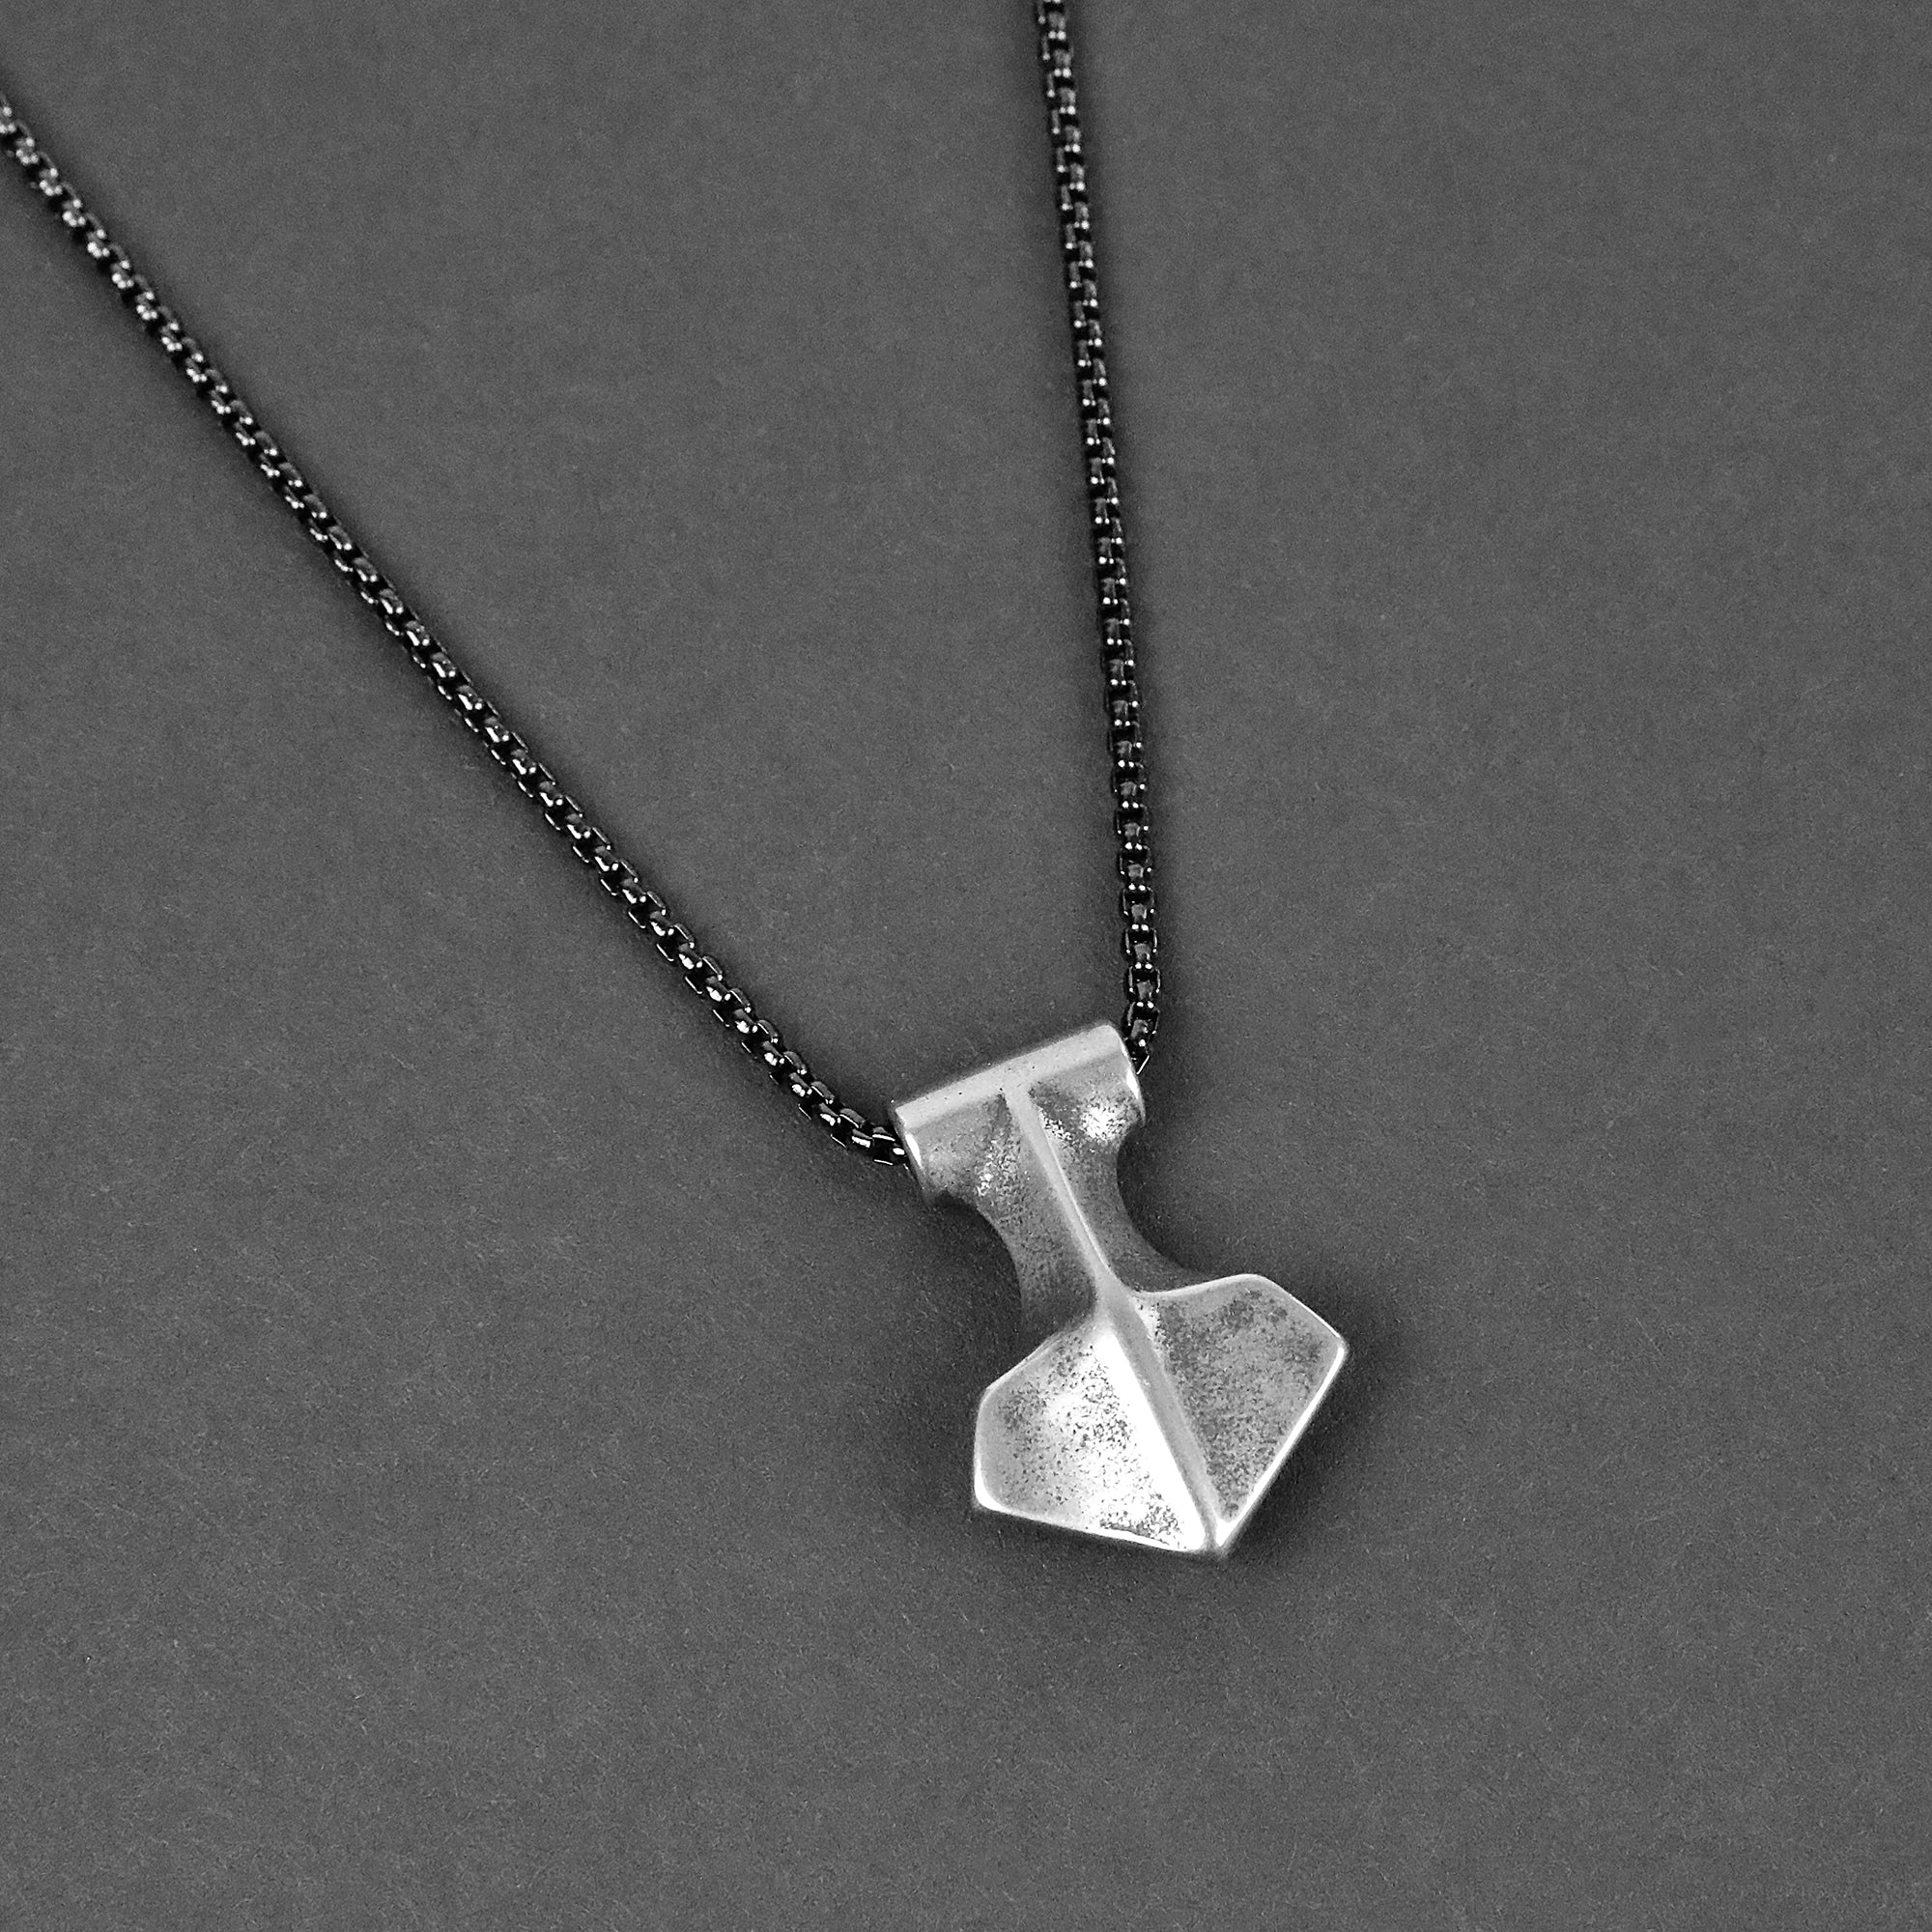 Viking Axe Necklace - Aged Silver x Black